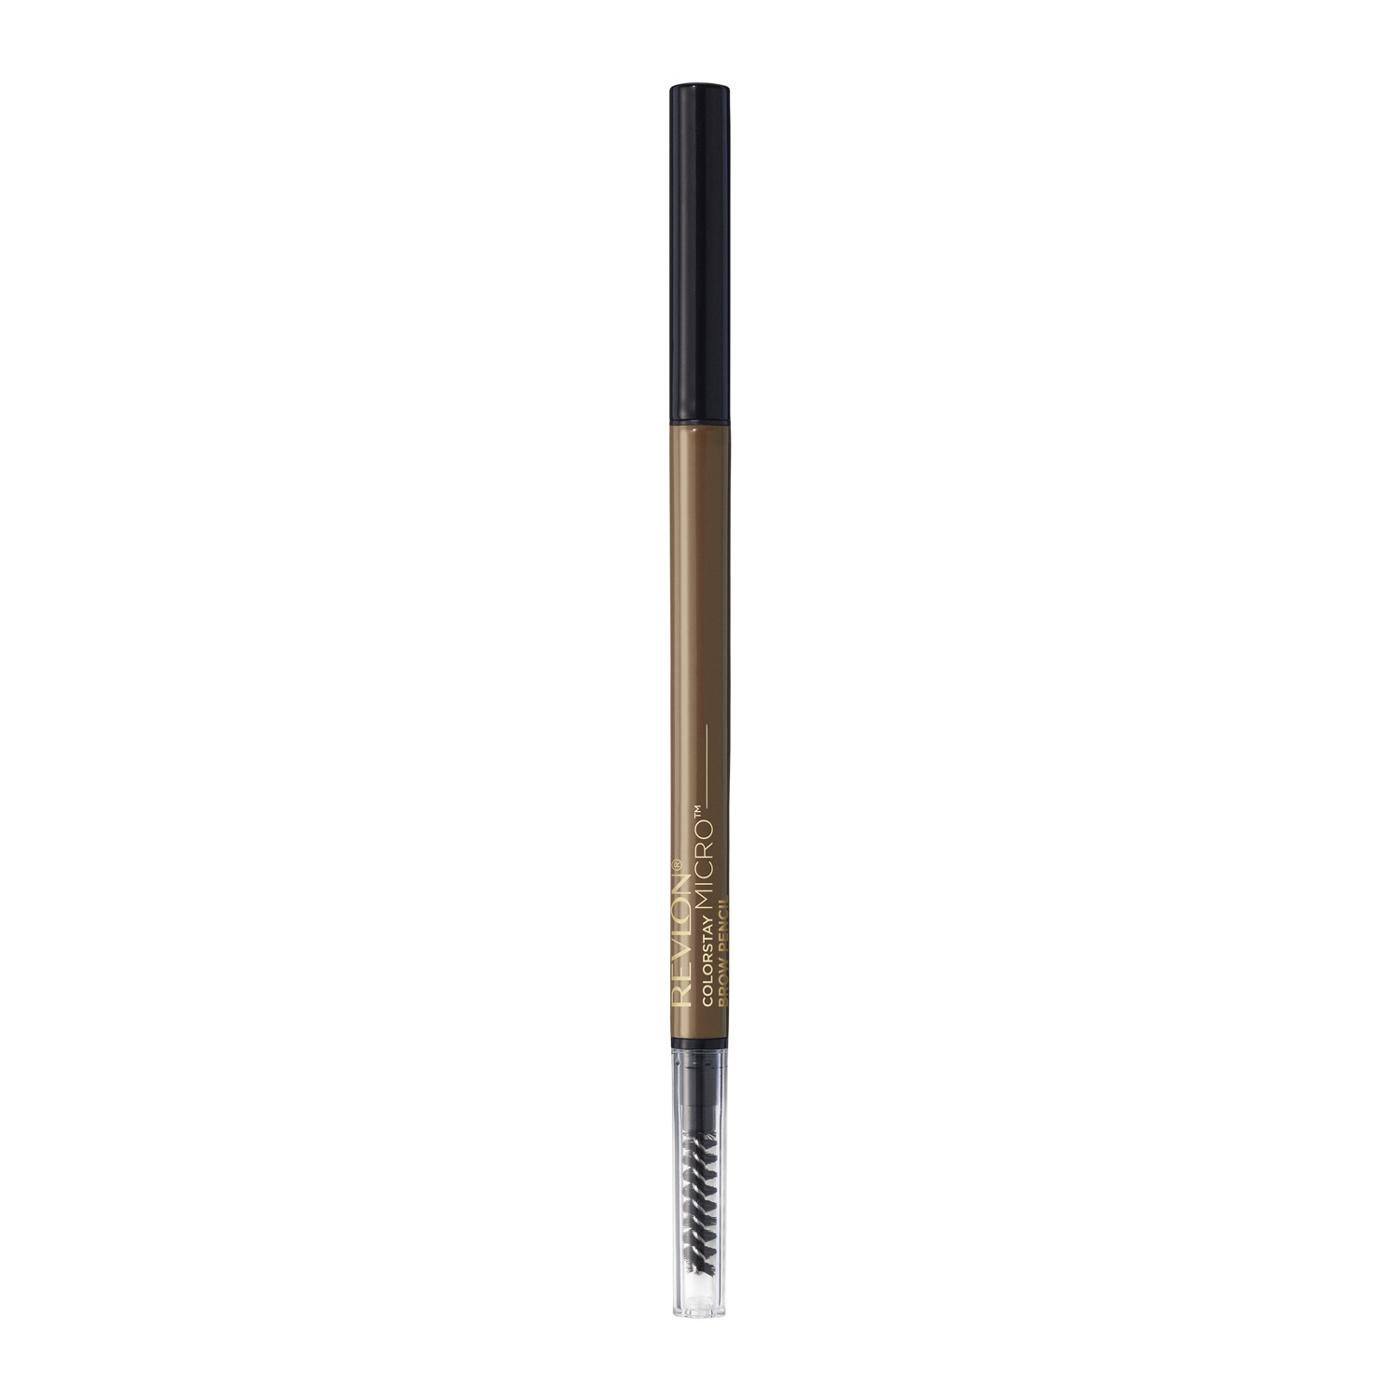 Revlon ColorStay Micro Brow Pencil - Soft Brown; image 1 of 12